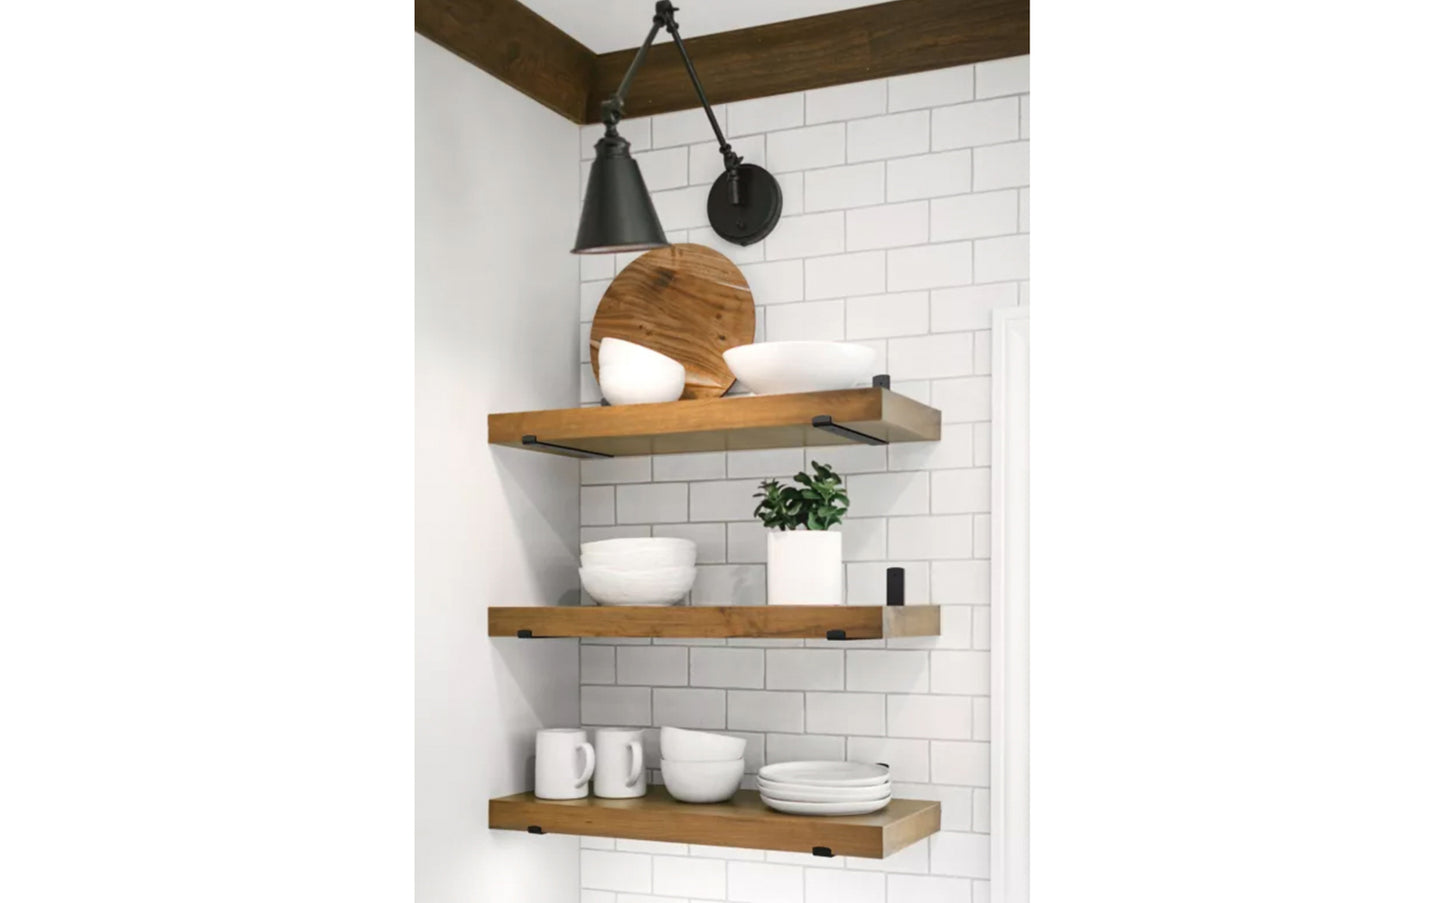 This floating shelf hardware kit set includes 4 shelf brackets, 8 wall anchors and 16 flat head screws. Made with industry-grade steel on trend matte black finish. All mounting hardware included for installation. Can be installed with shelves up to 11-3/8" depth. National Hardware Model No. N900-002.